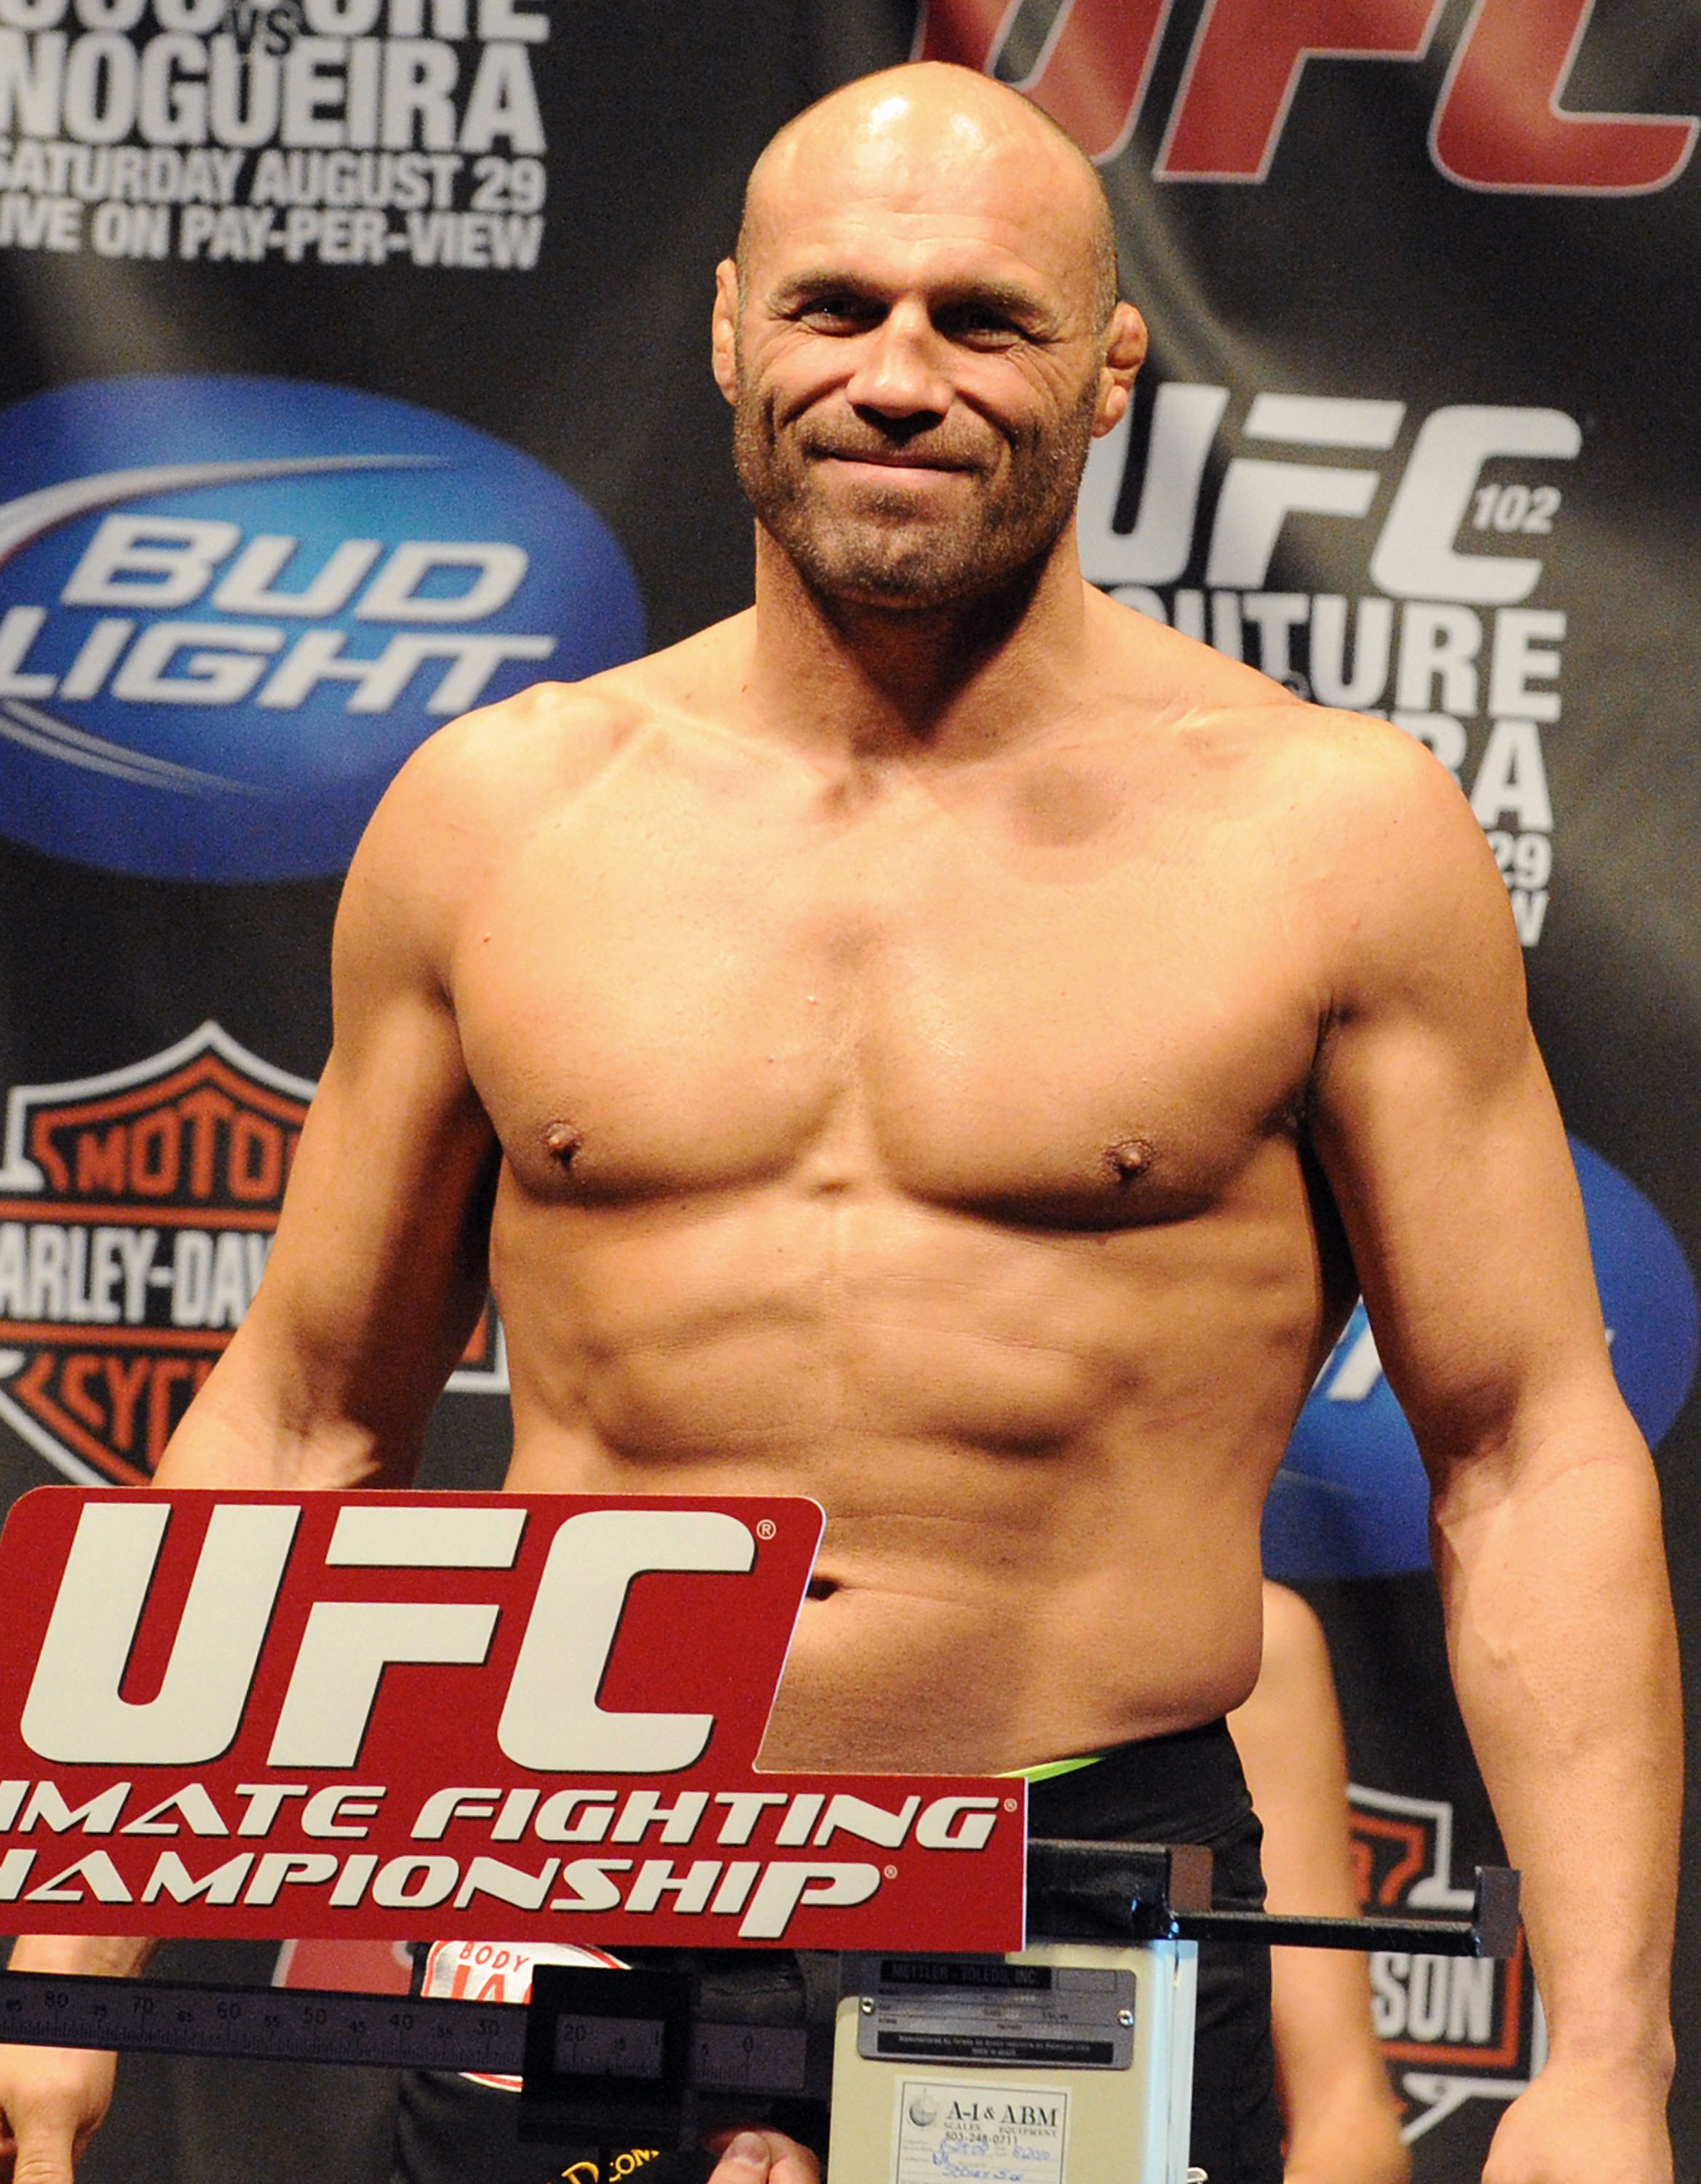 PORTLAND, OR - AUGUST 28: UFC heavyweight fighter Randy Couture weighs in at UFC 102: Couture vs. Nogueira Weigh-In at the Rose Garden Arena on August 28, 2009 in Portland, Oregon. (Photo by Jon Kopaloff/Getty Images)